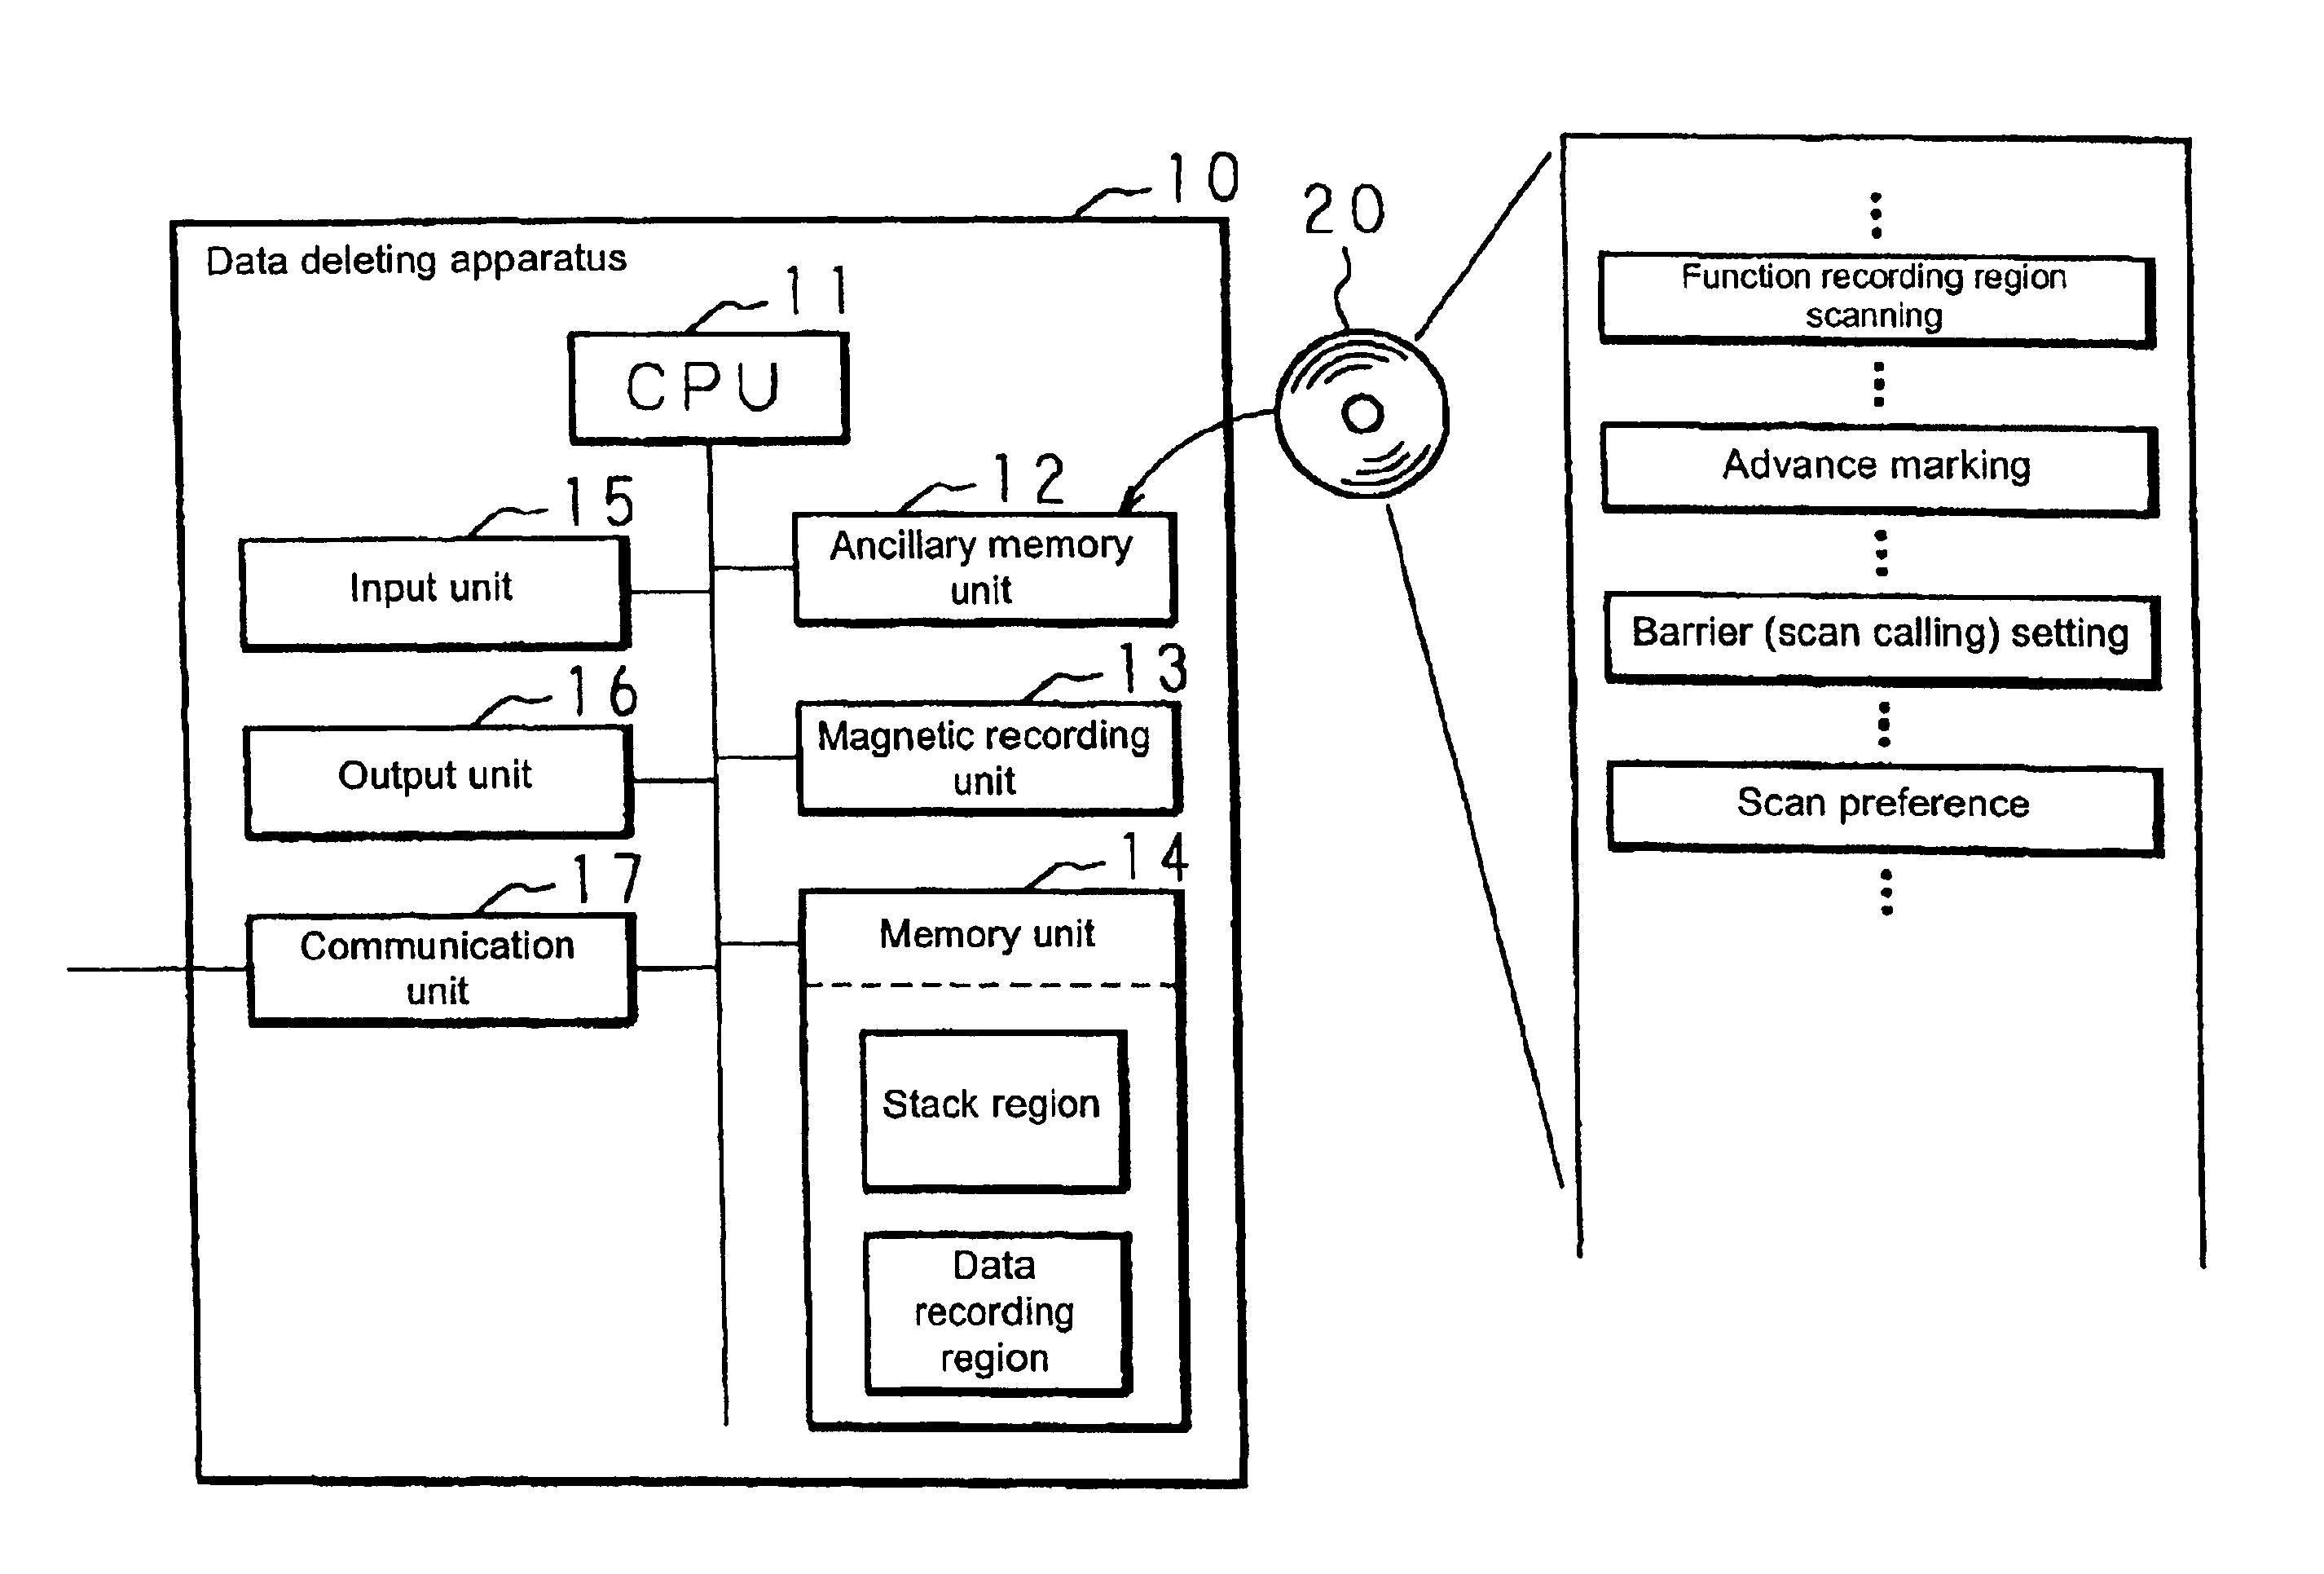 Method and apparatus for garbage collection using advanced marking techniques and restricted barrier to protect the data